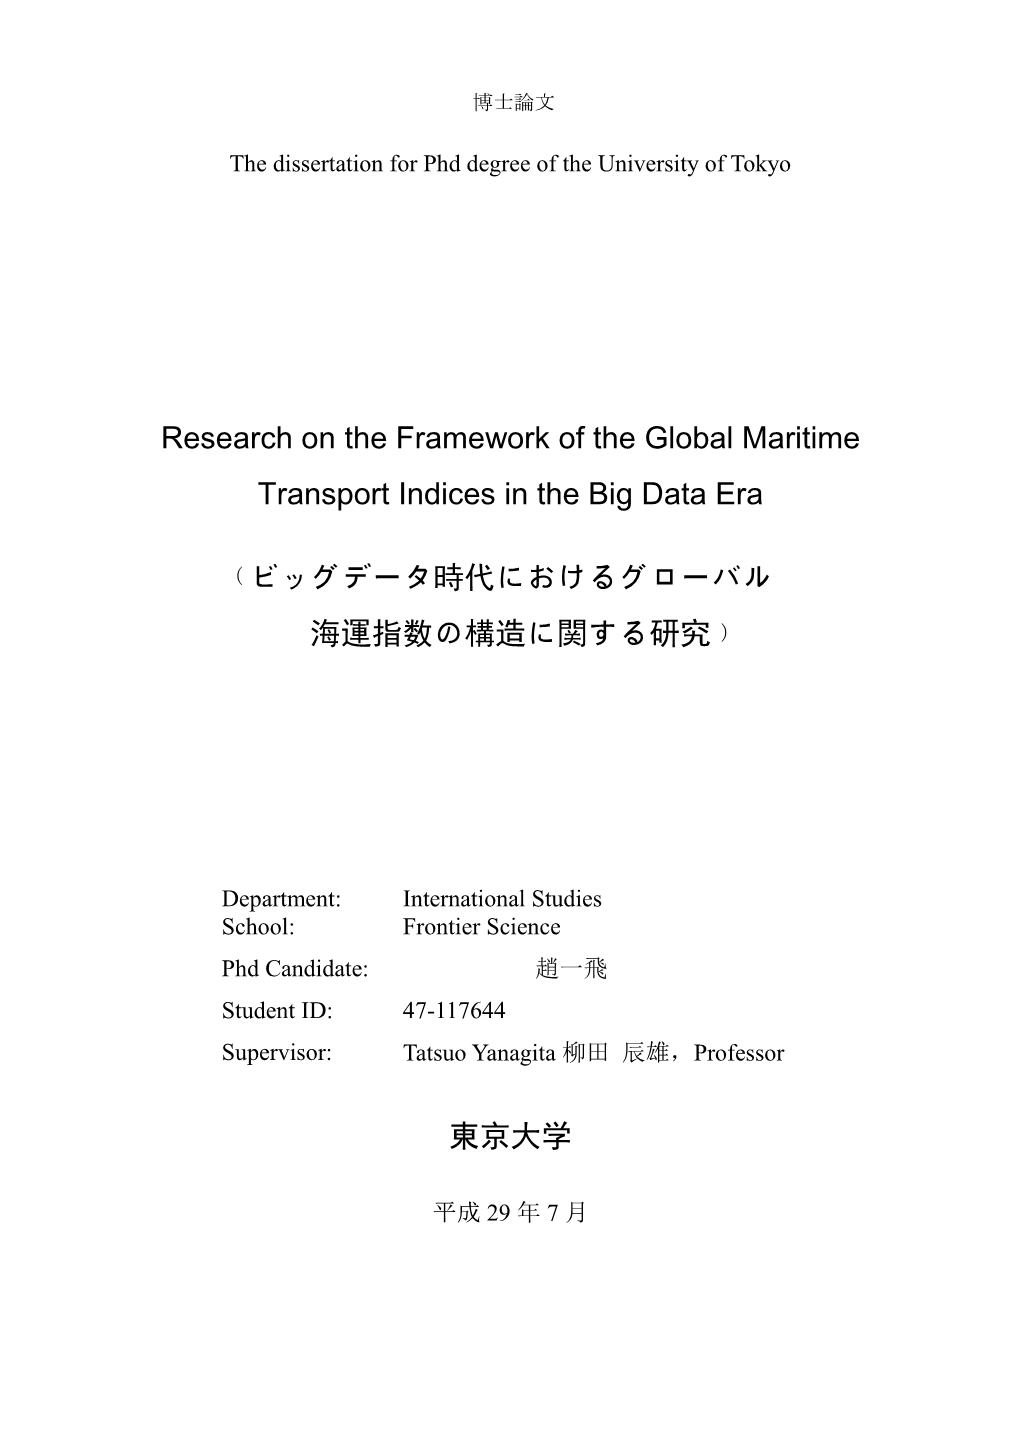 Research on the Framework of the Global Maritime Transport Indices in the Big Data Era